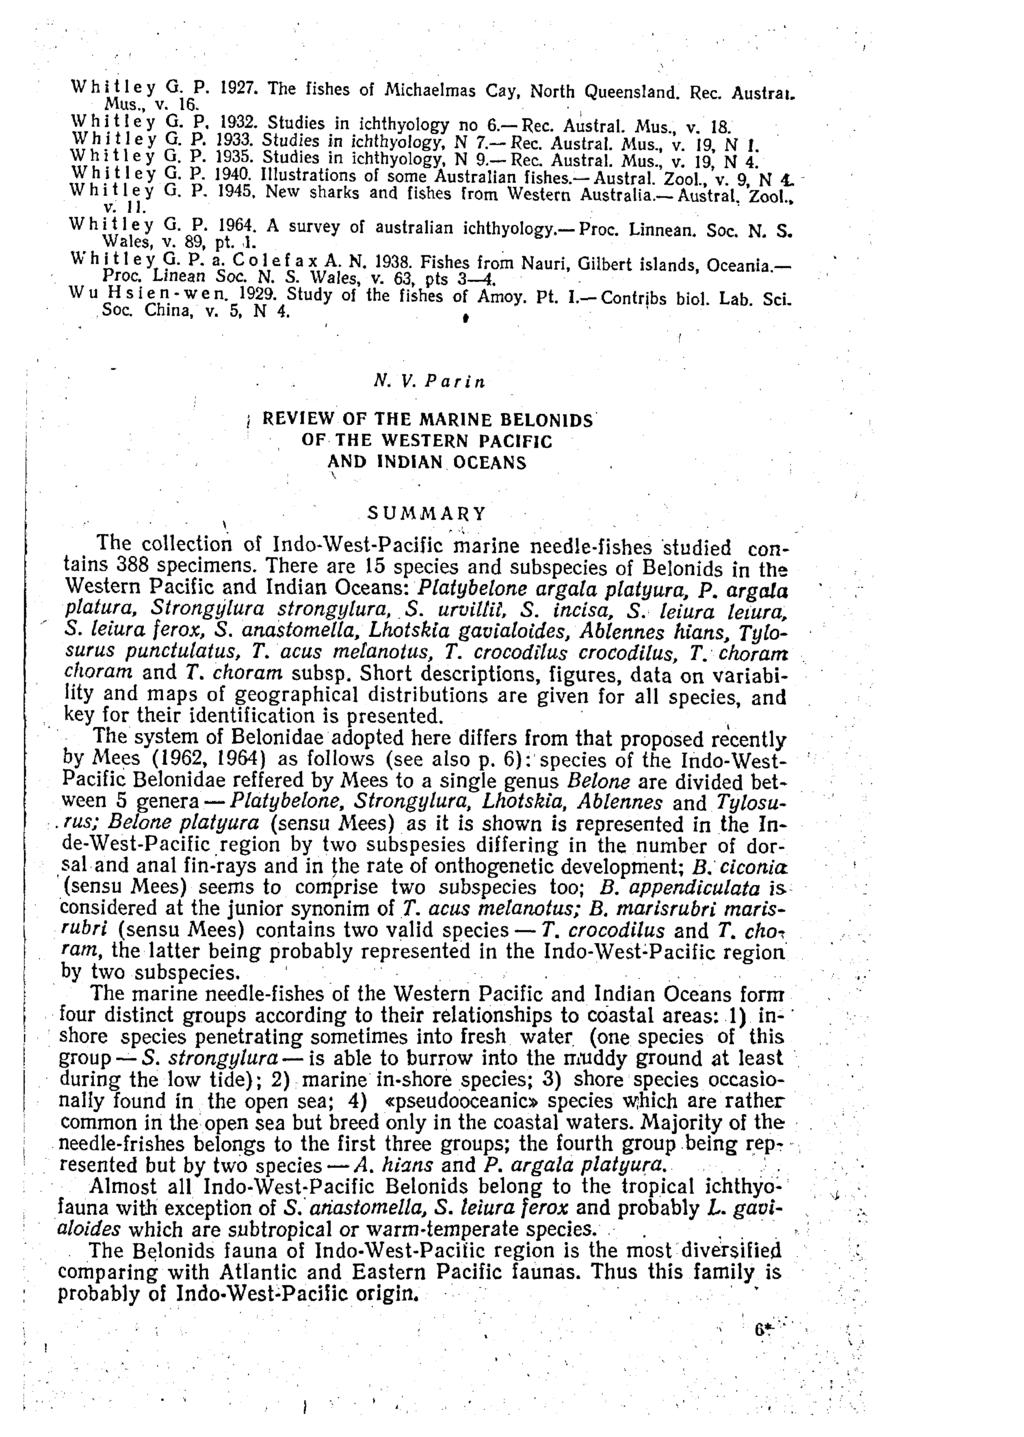 Whit I e y G. P. 1927. The fishes of Michaelmas Cay, North Queensland. Ree. Austrar. Mus., v. 16. 1 \V hit I e y G. P. 1932. Studies in ichthyology no 6.- Ree. Austral. Mus., v. 18. Whit 1 e y G. P. 1933.